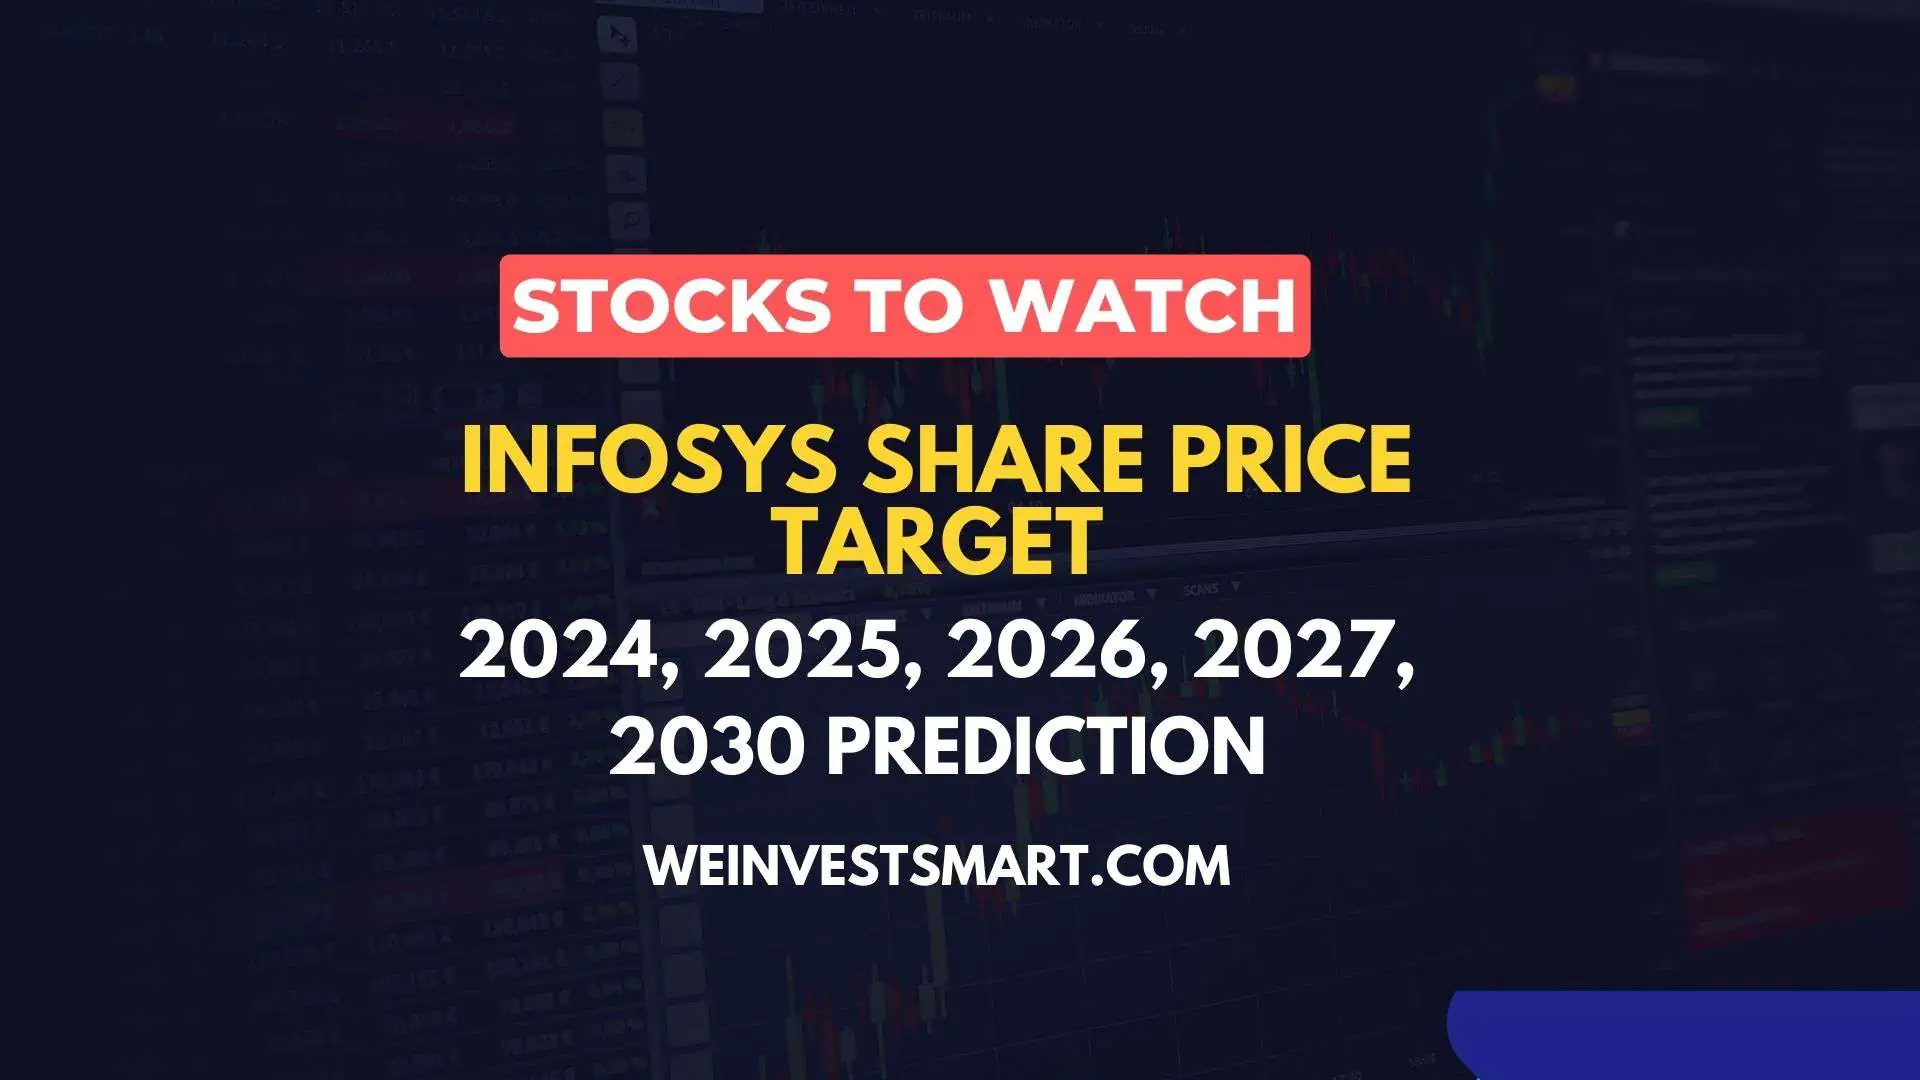 Infosys Share Price Target 2024, 2025, 2026, 2027, 2030 Prediction Buy or Sell